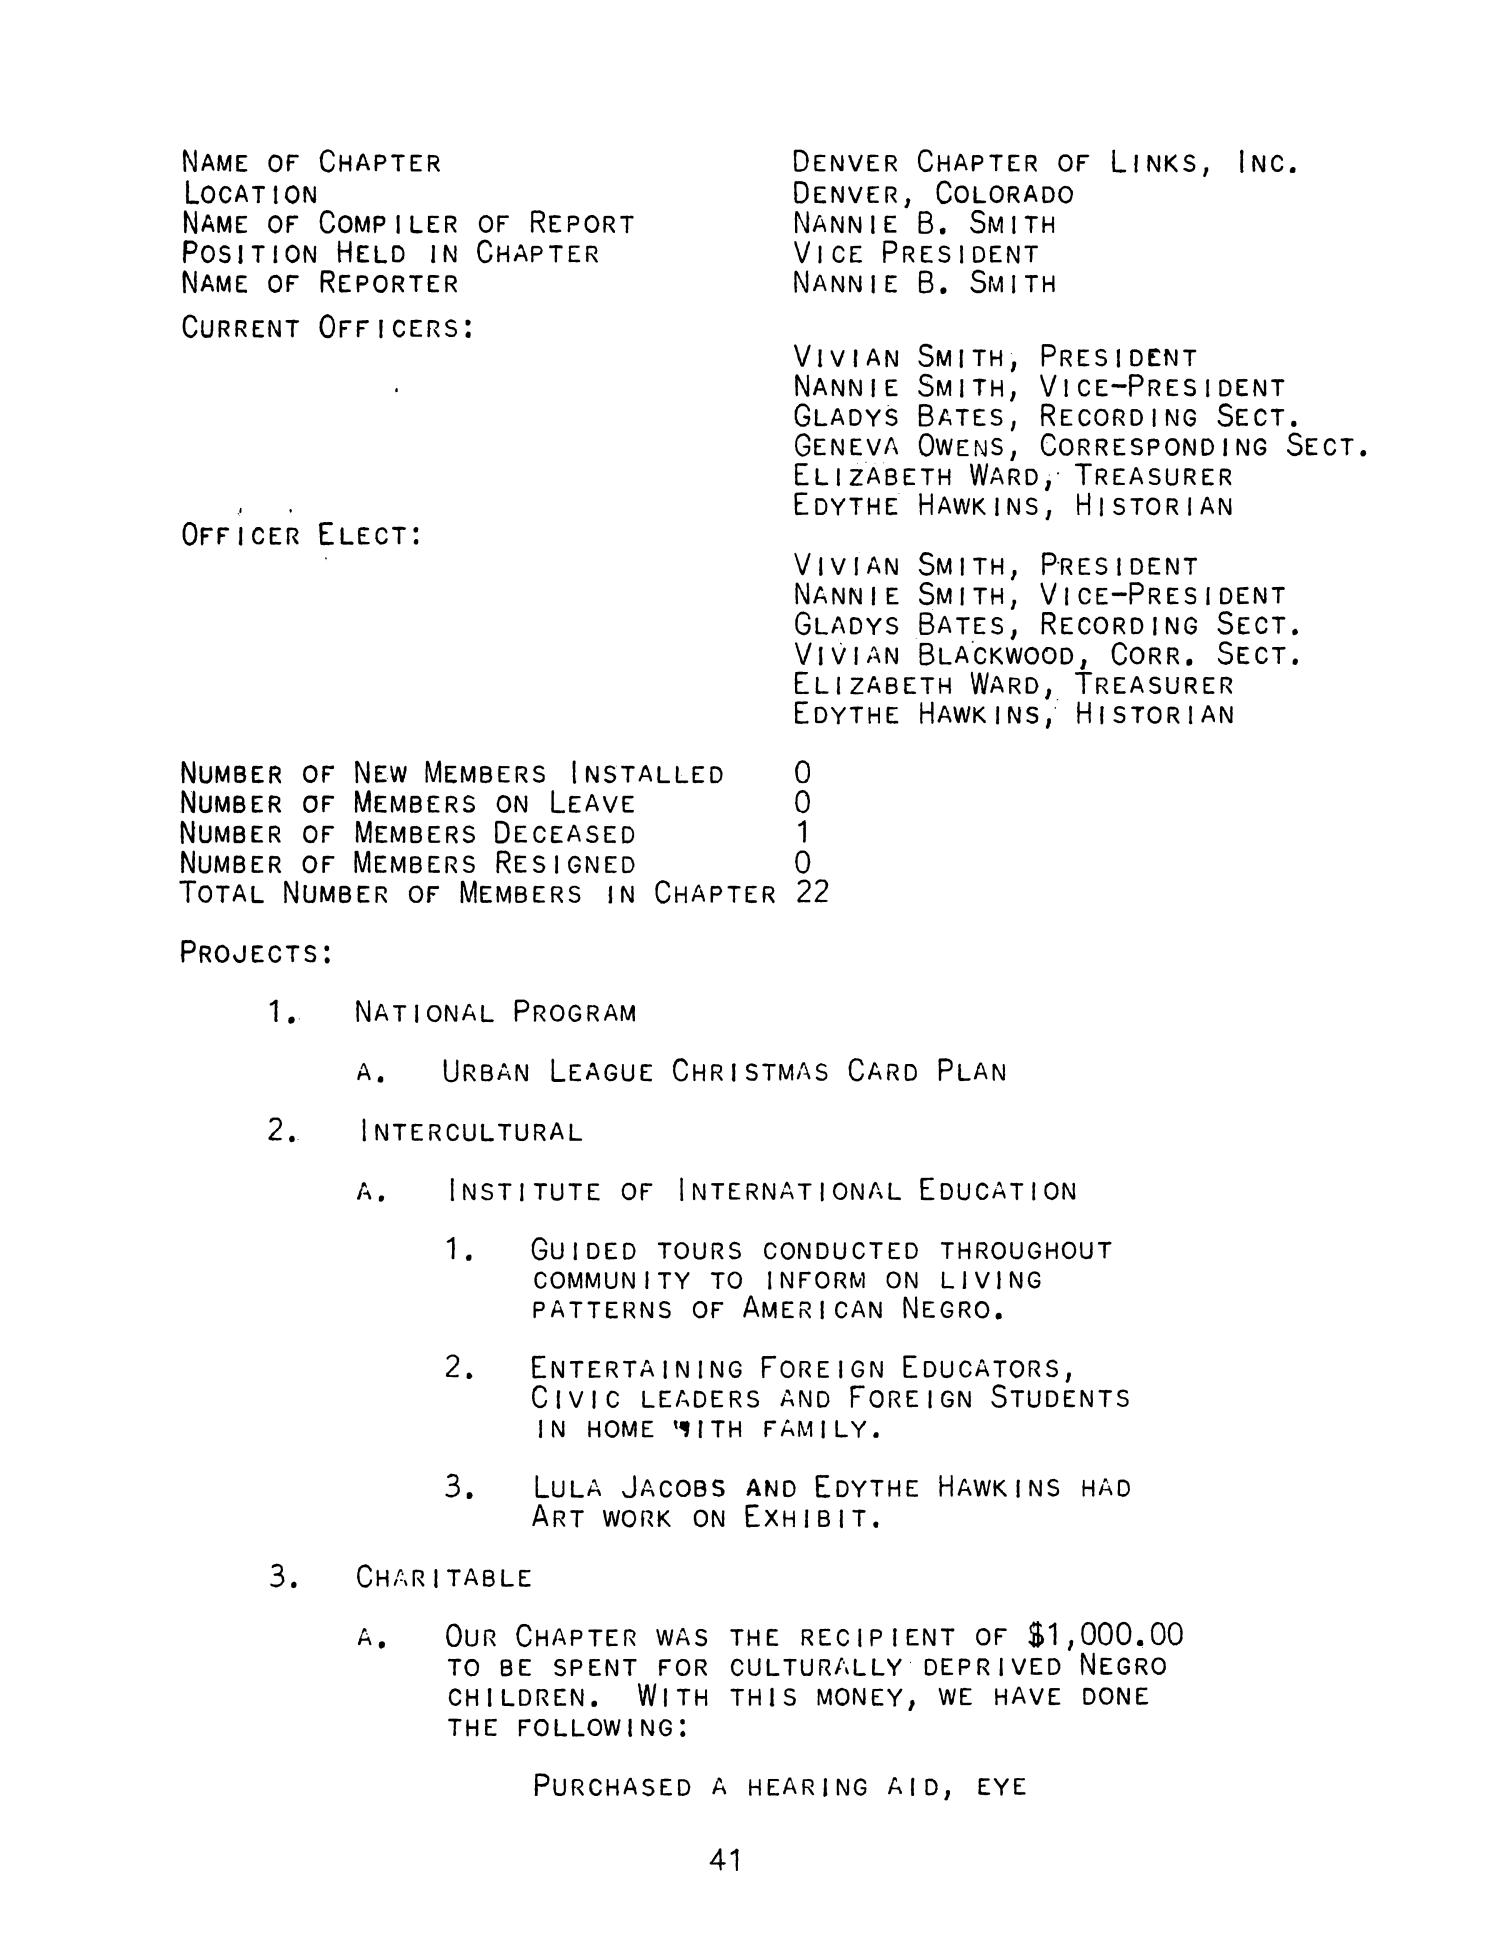 Minutes of the Eleventh Western Area Conference of The Links, Inc., June 22-23, 1964
                                                
                                                    41
                                                